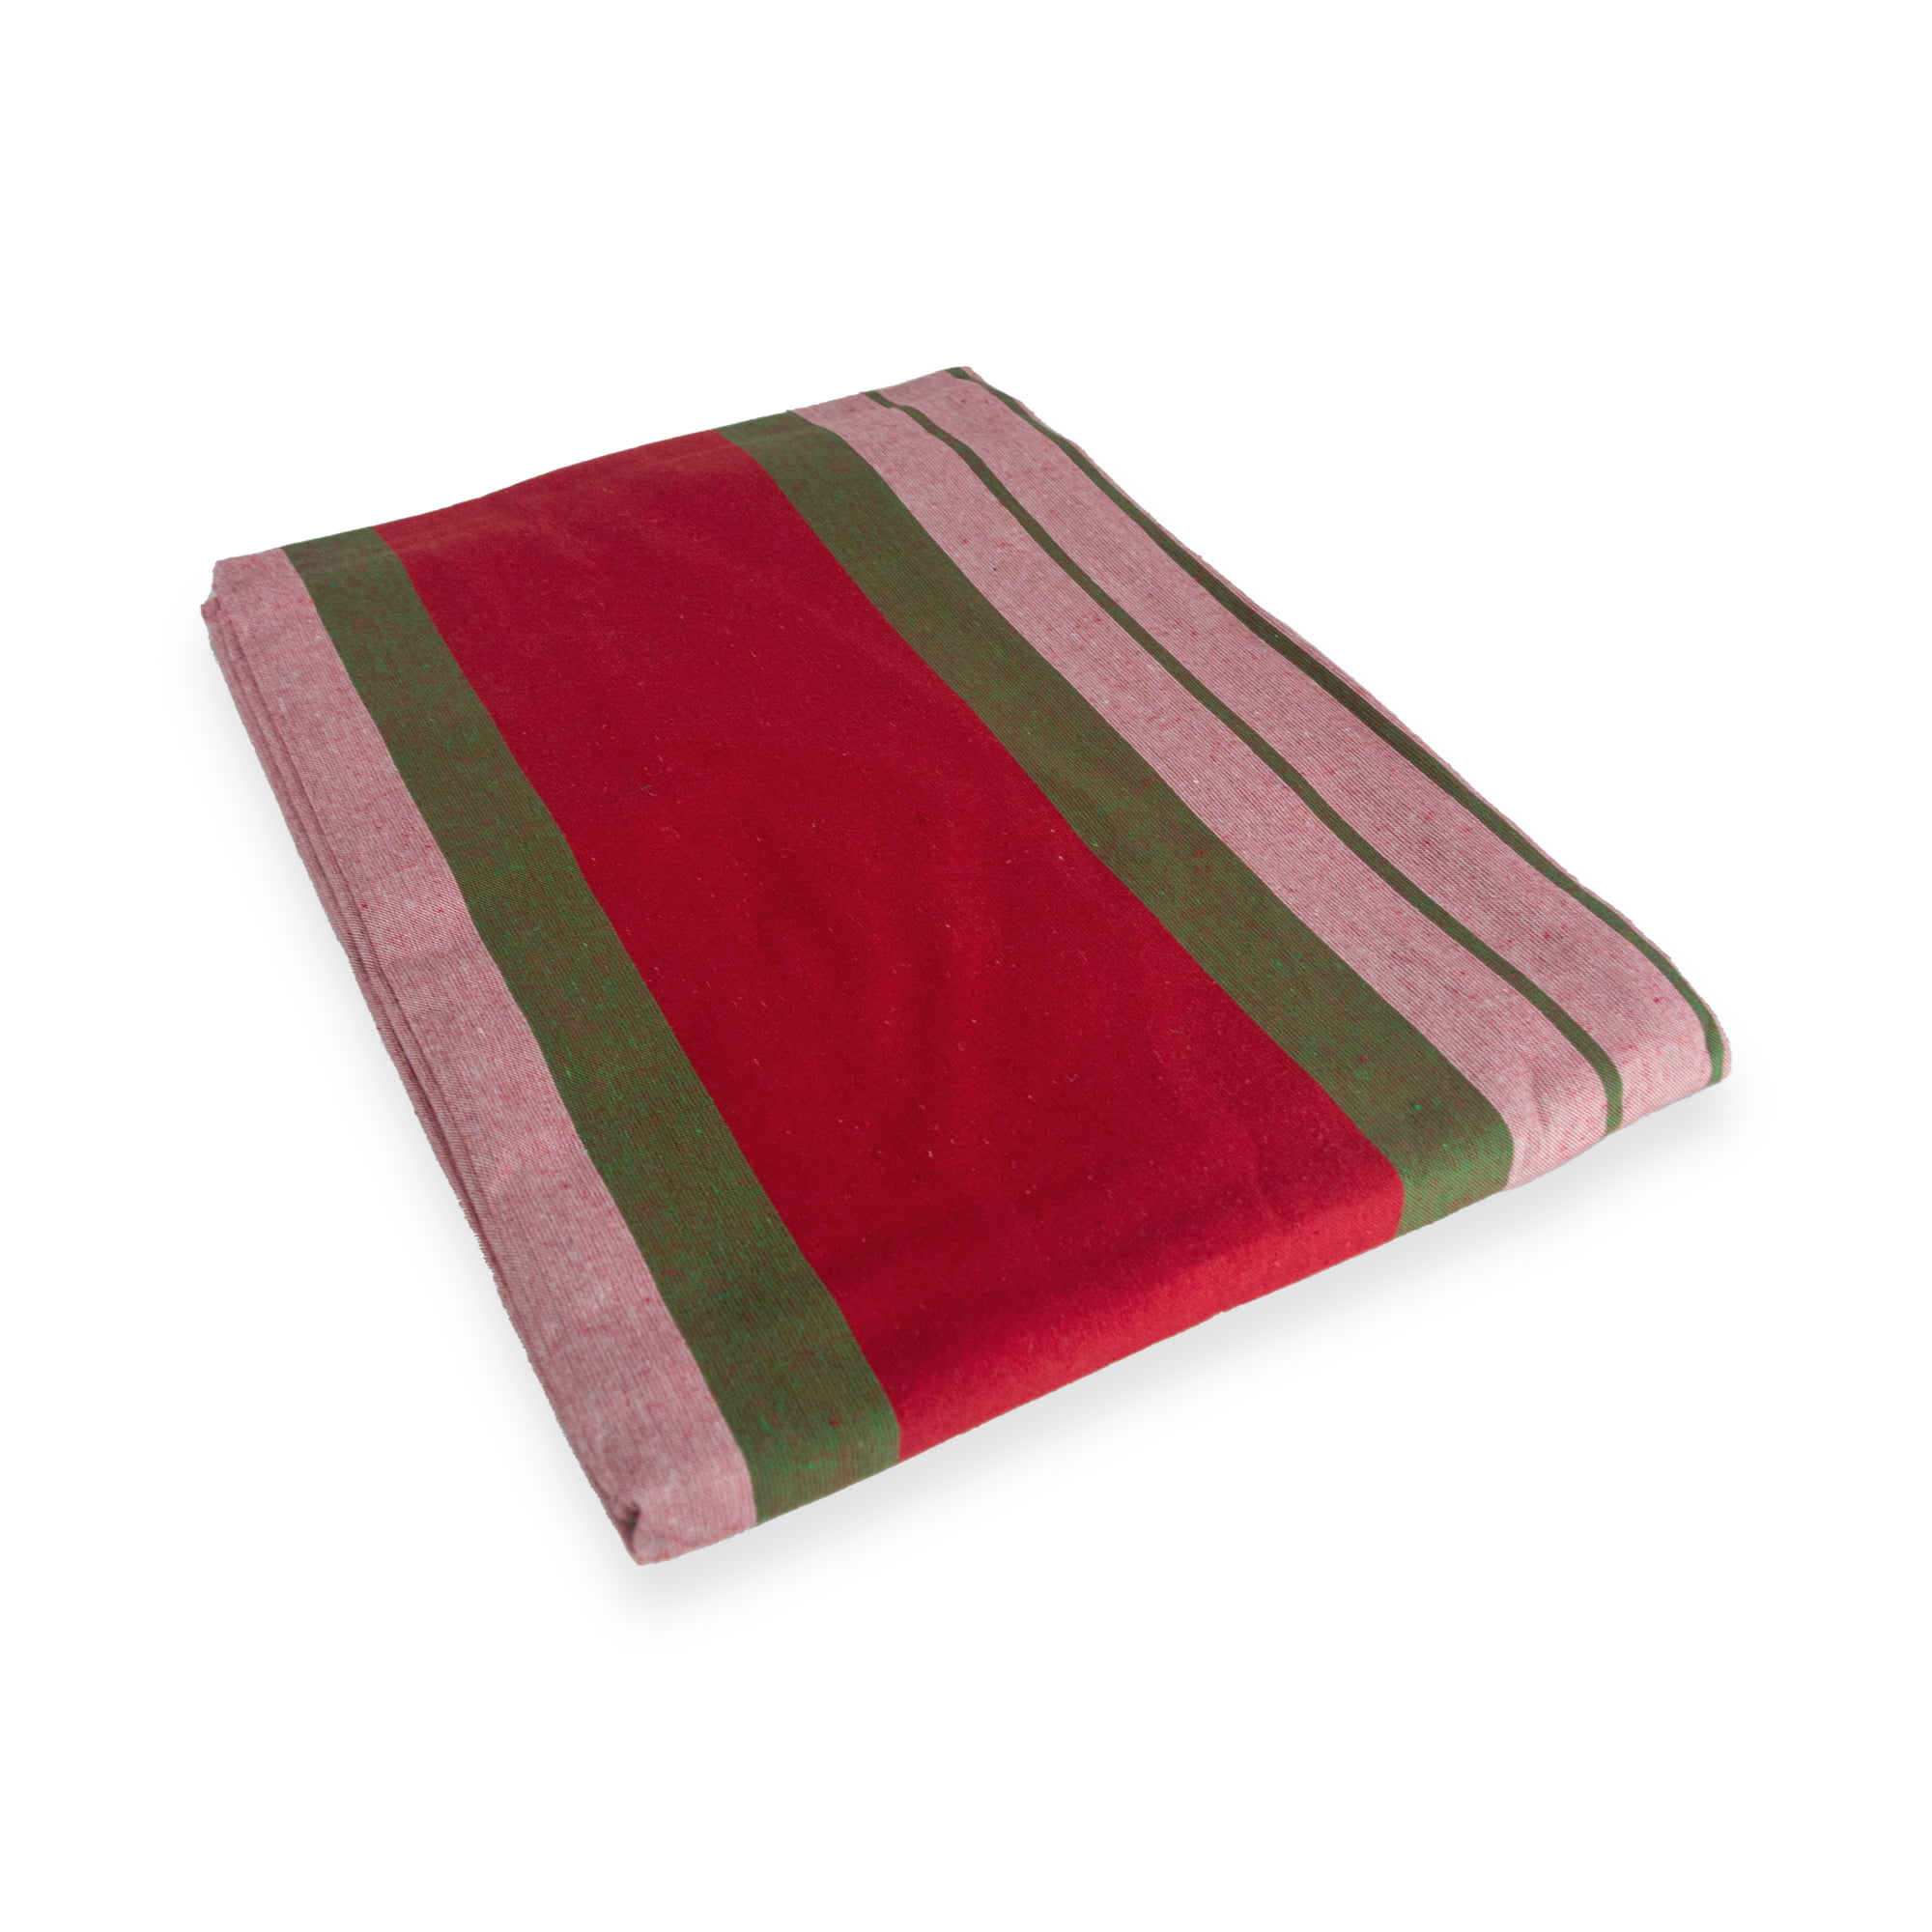 Red Handloom Cotton Bed Sheets 7.5x7.5 (Feet) for King, Queen, Super King, California King Beds